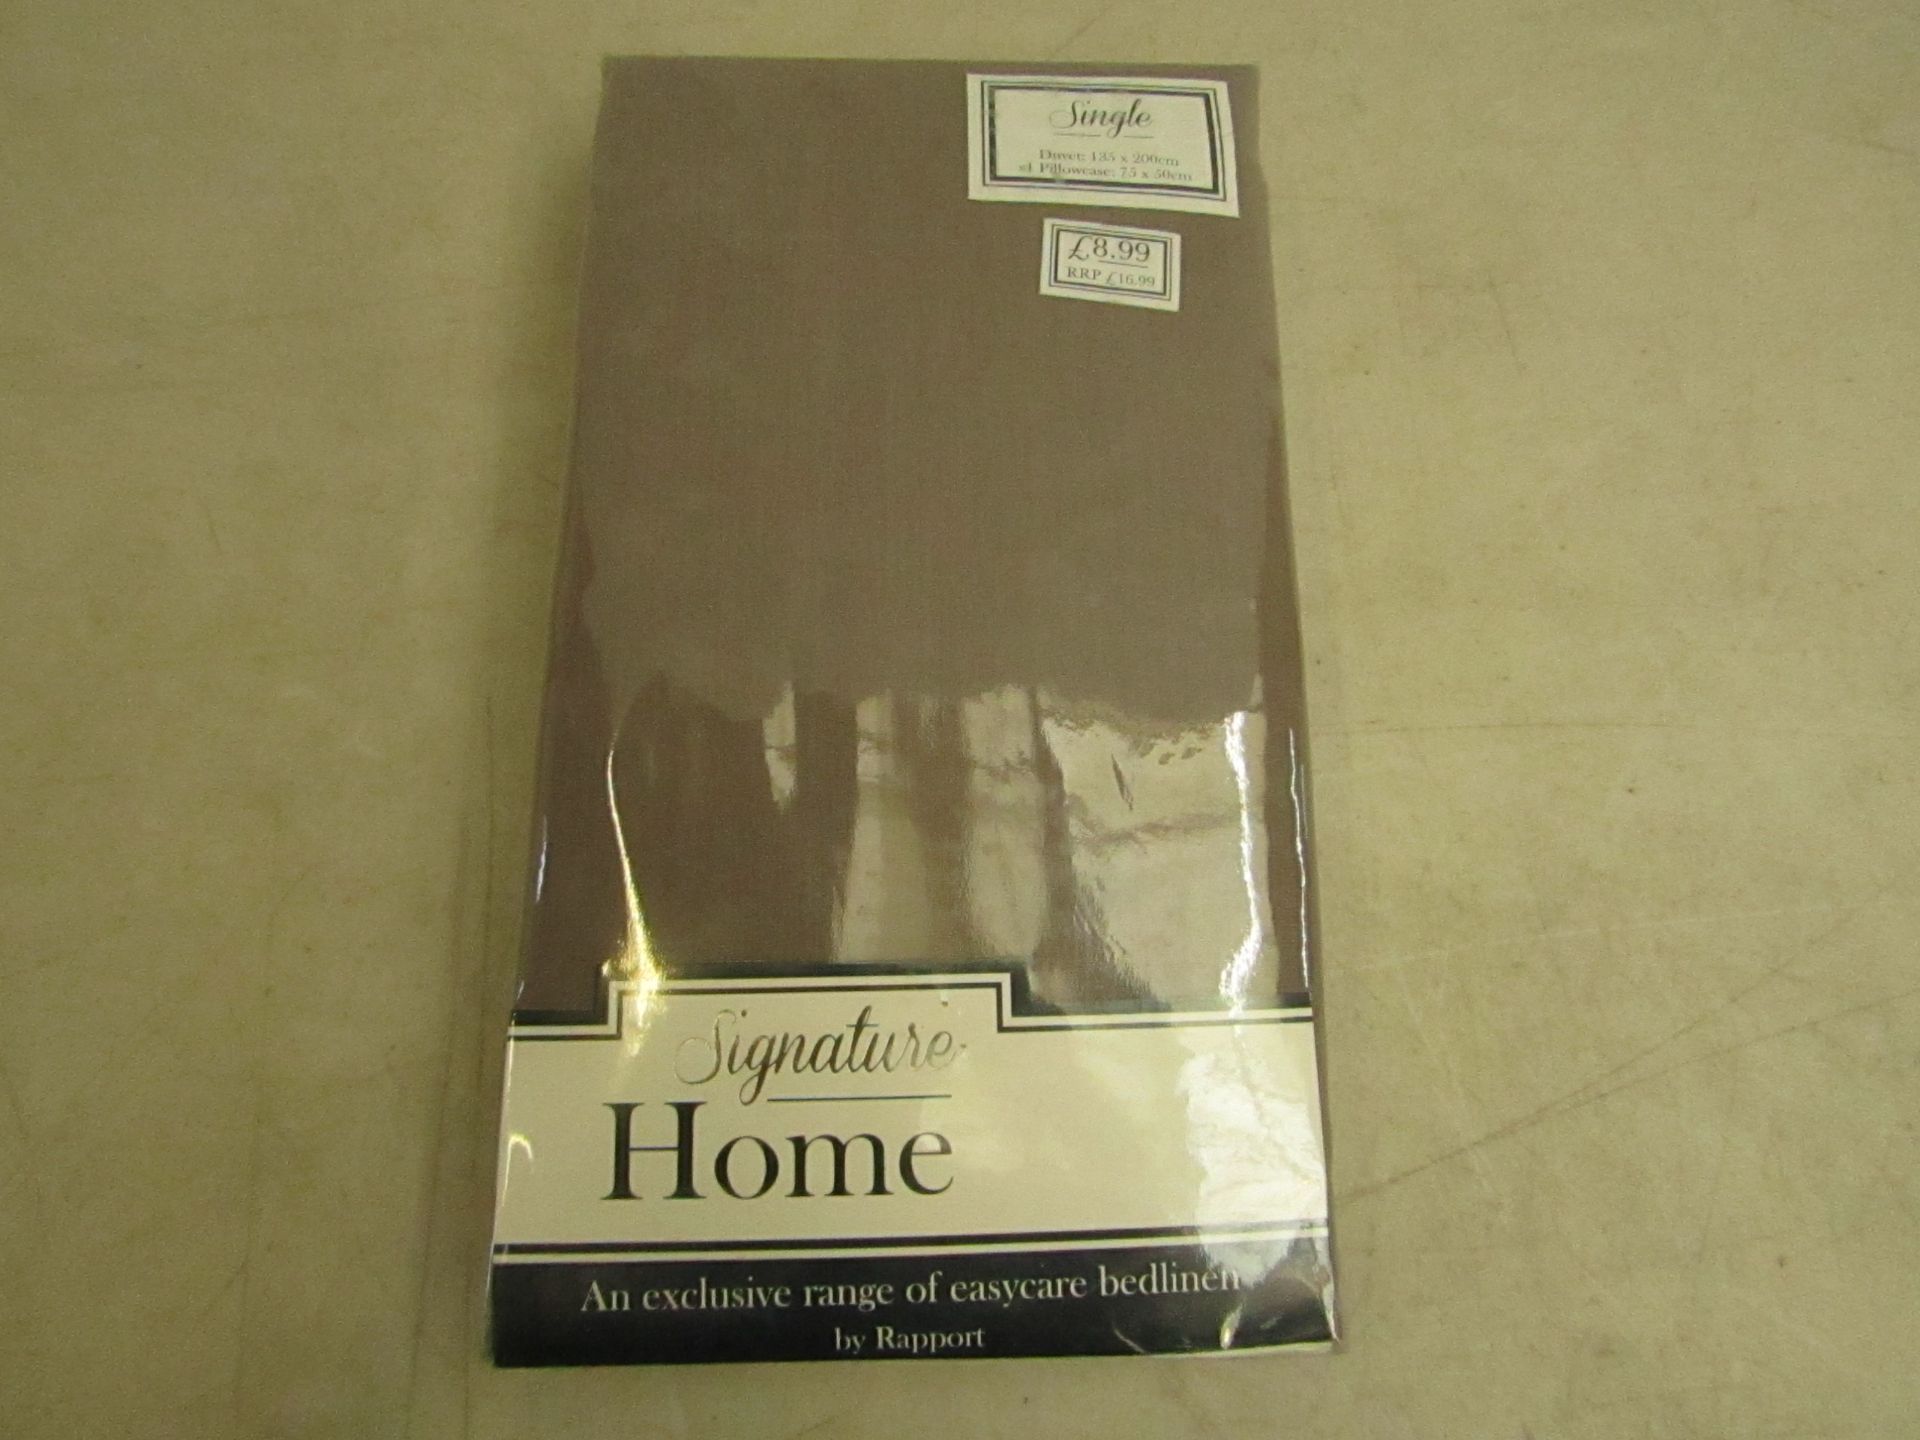 Signature Home single duvet 135 x 200cm and pillowcase 75 x 50cm. new and in packaging.